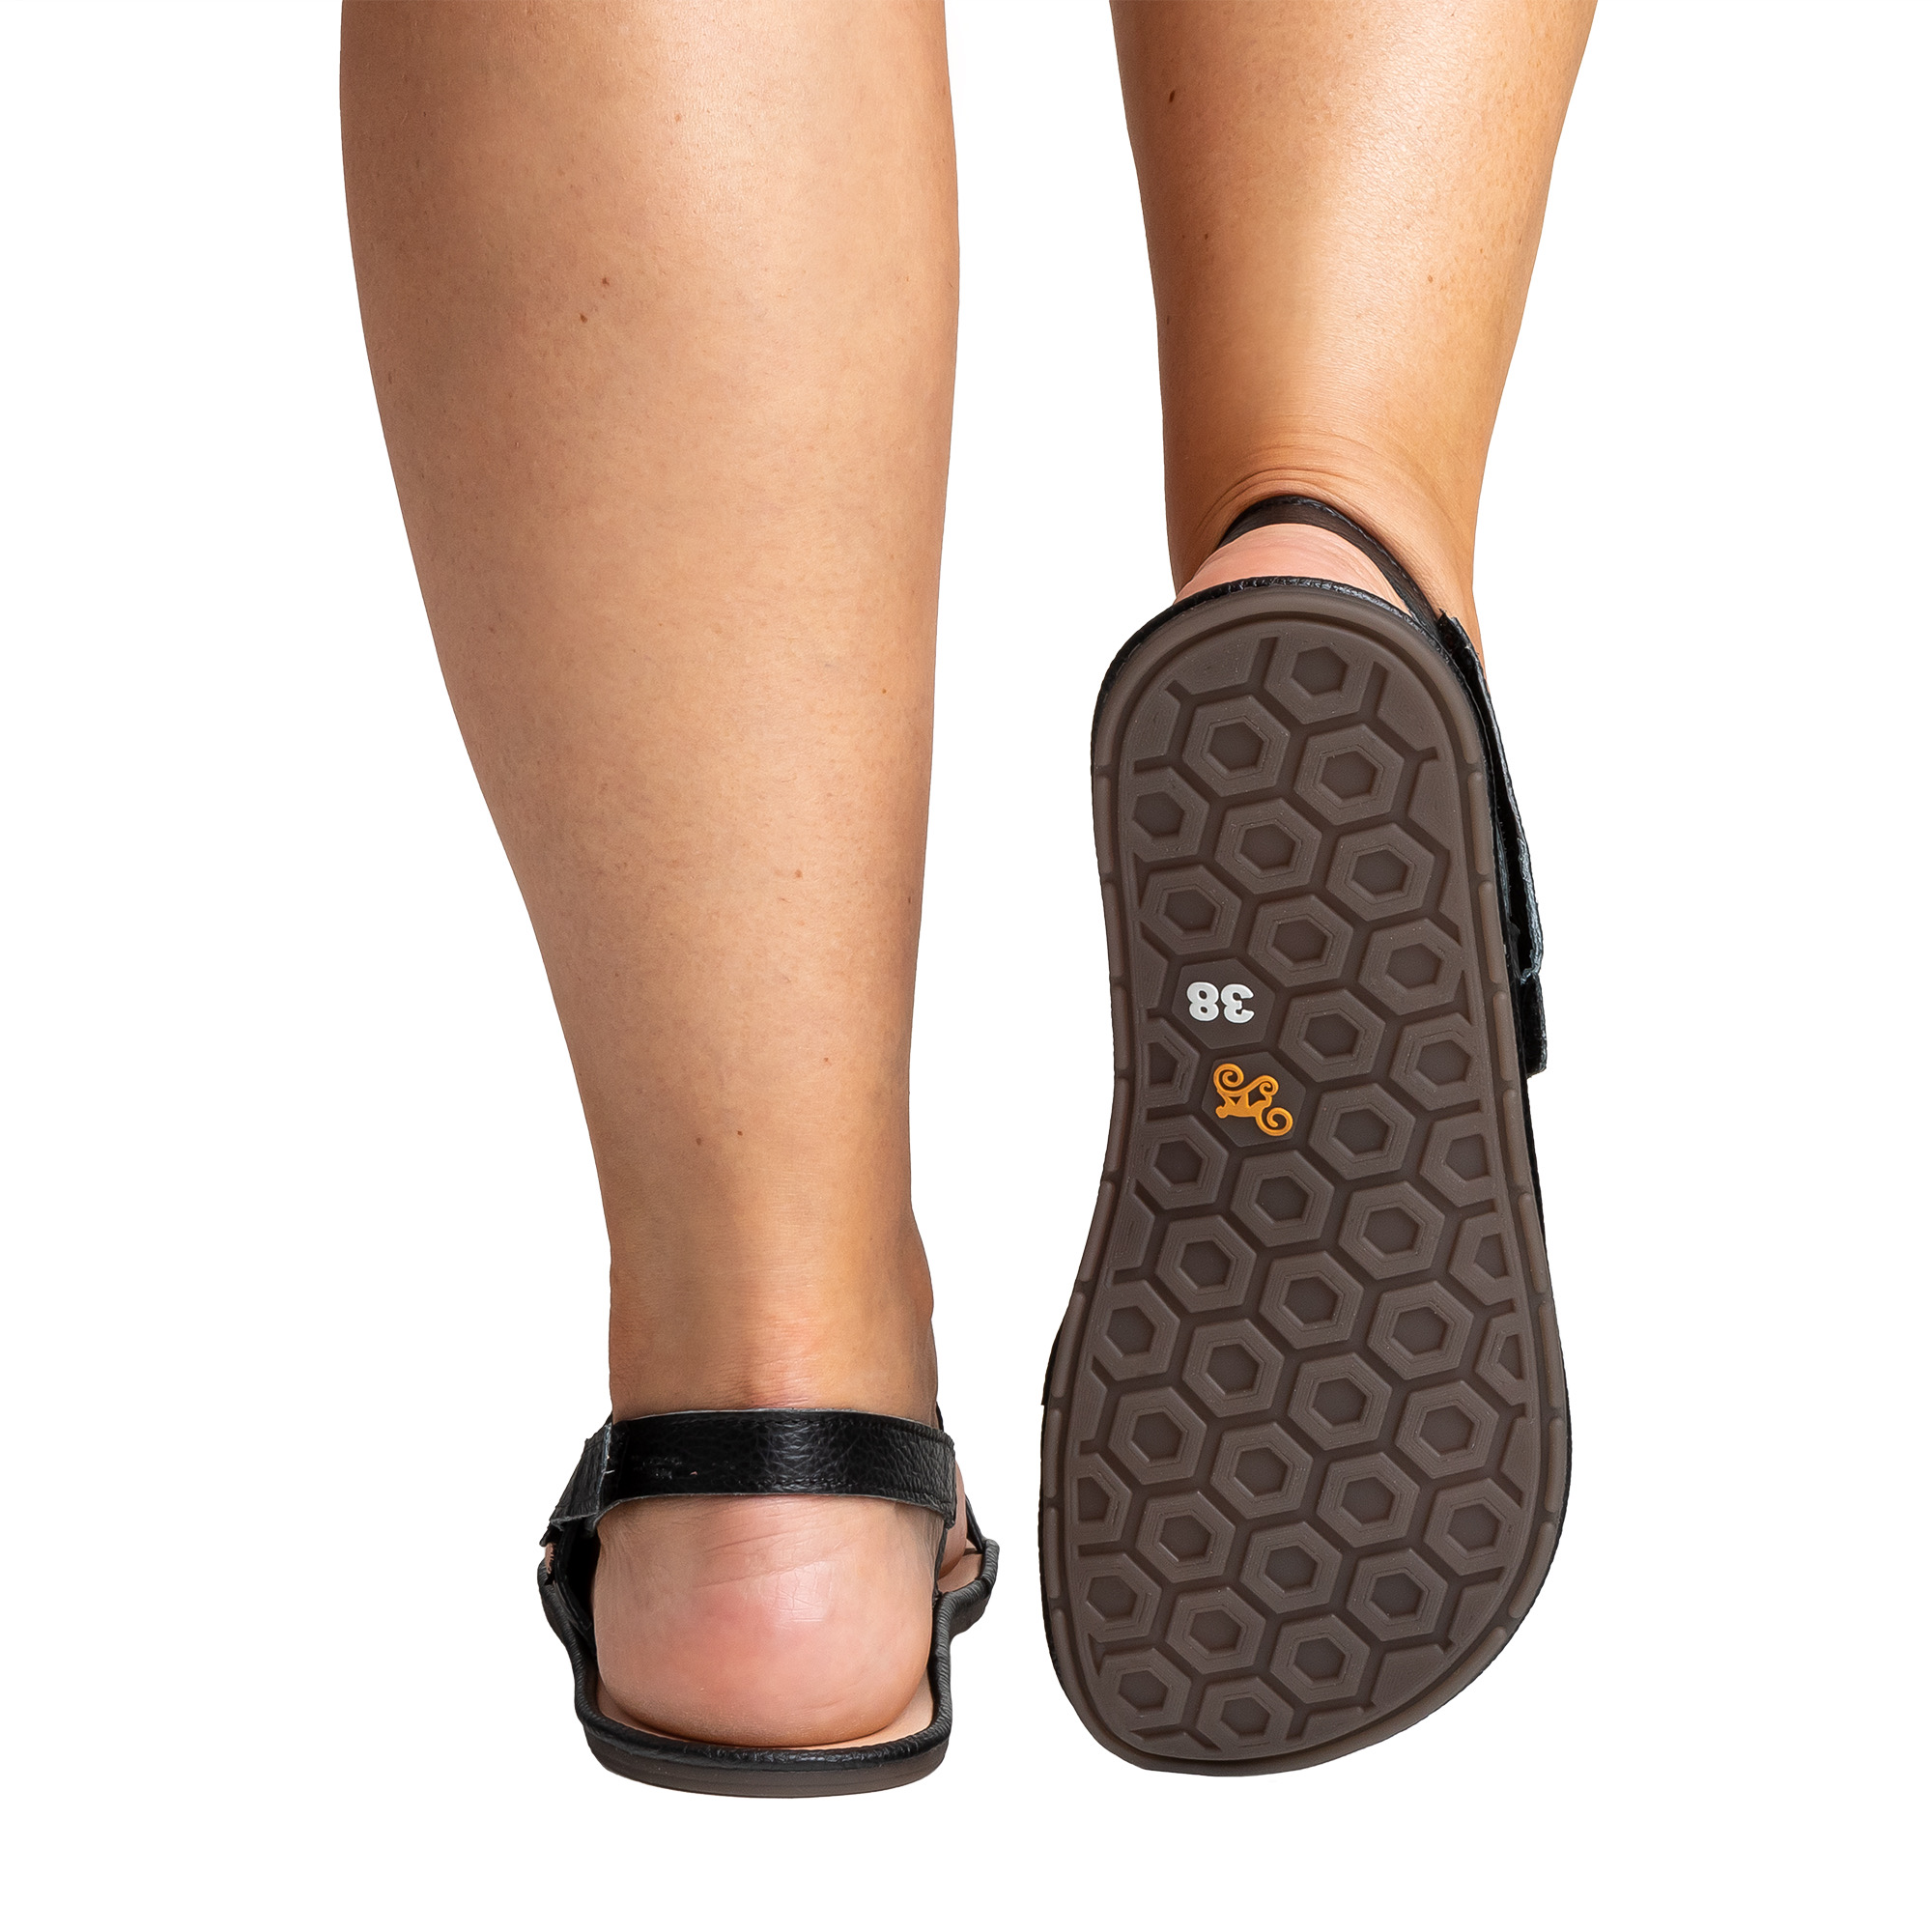 Sanuk Yoga Sling sandals+outfits - Google Search